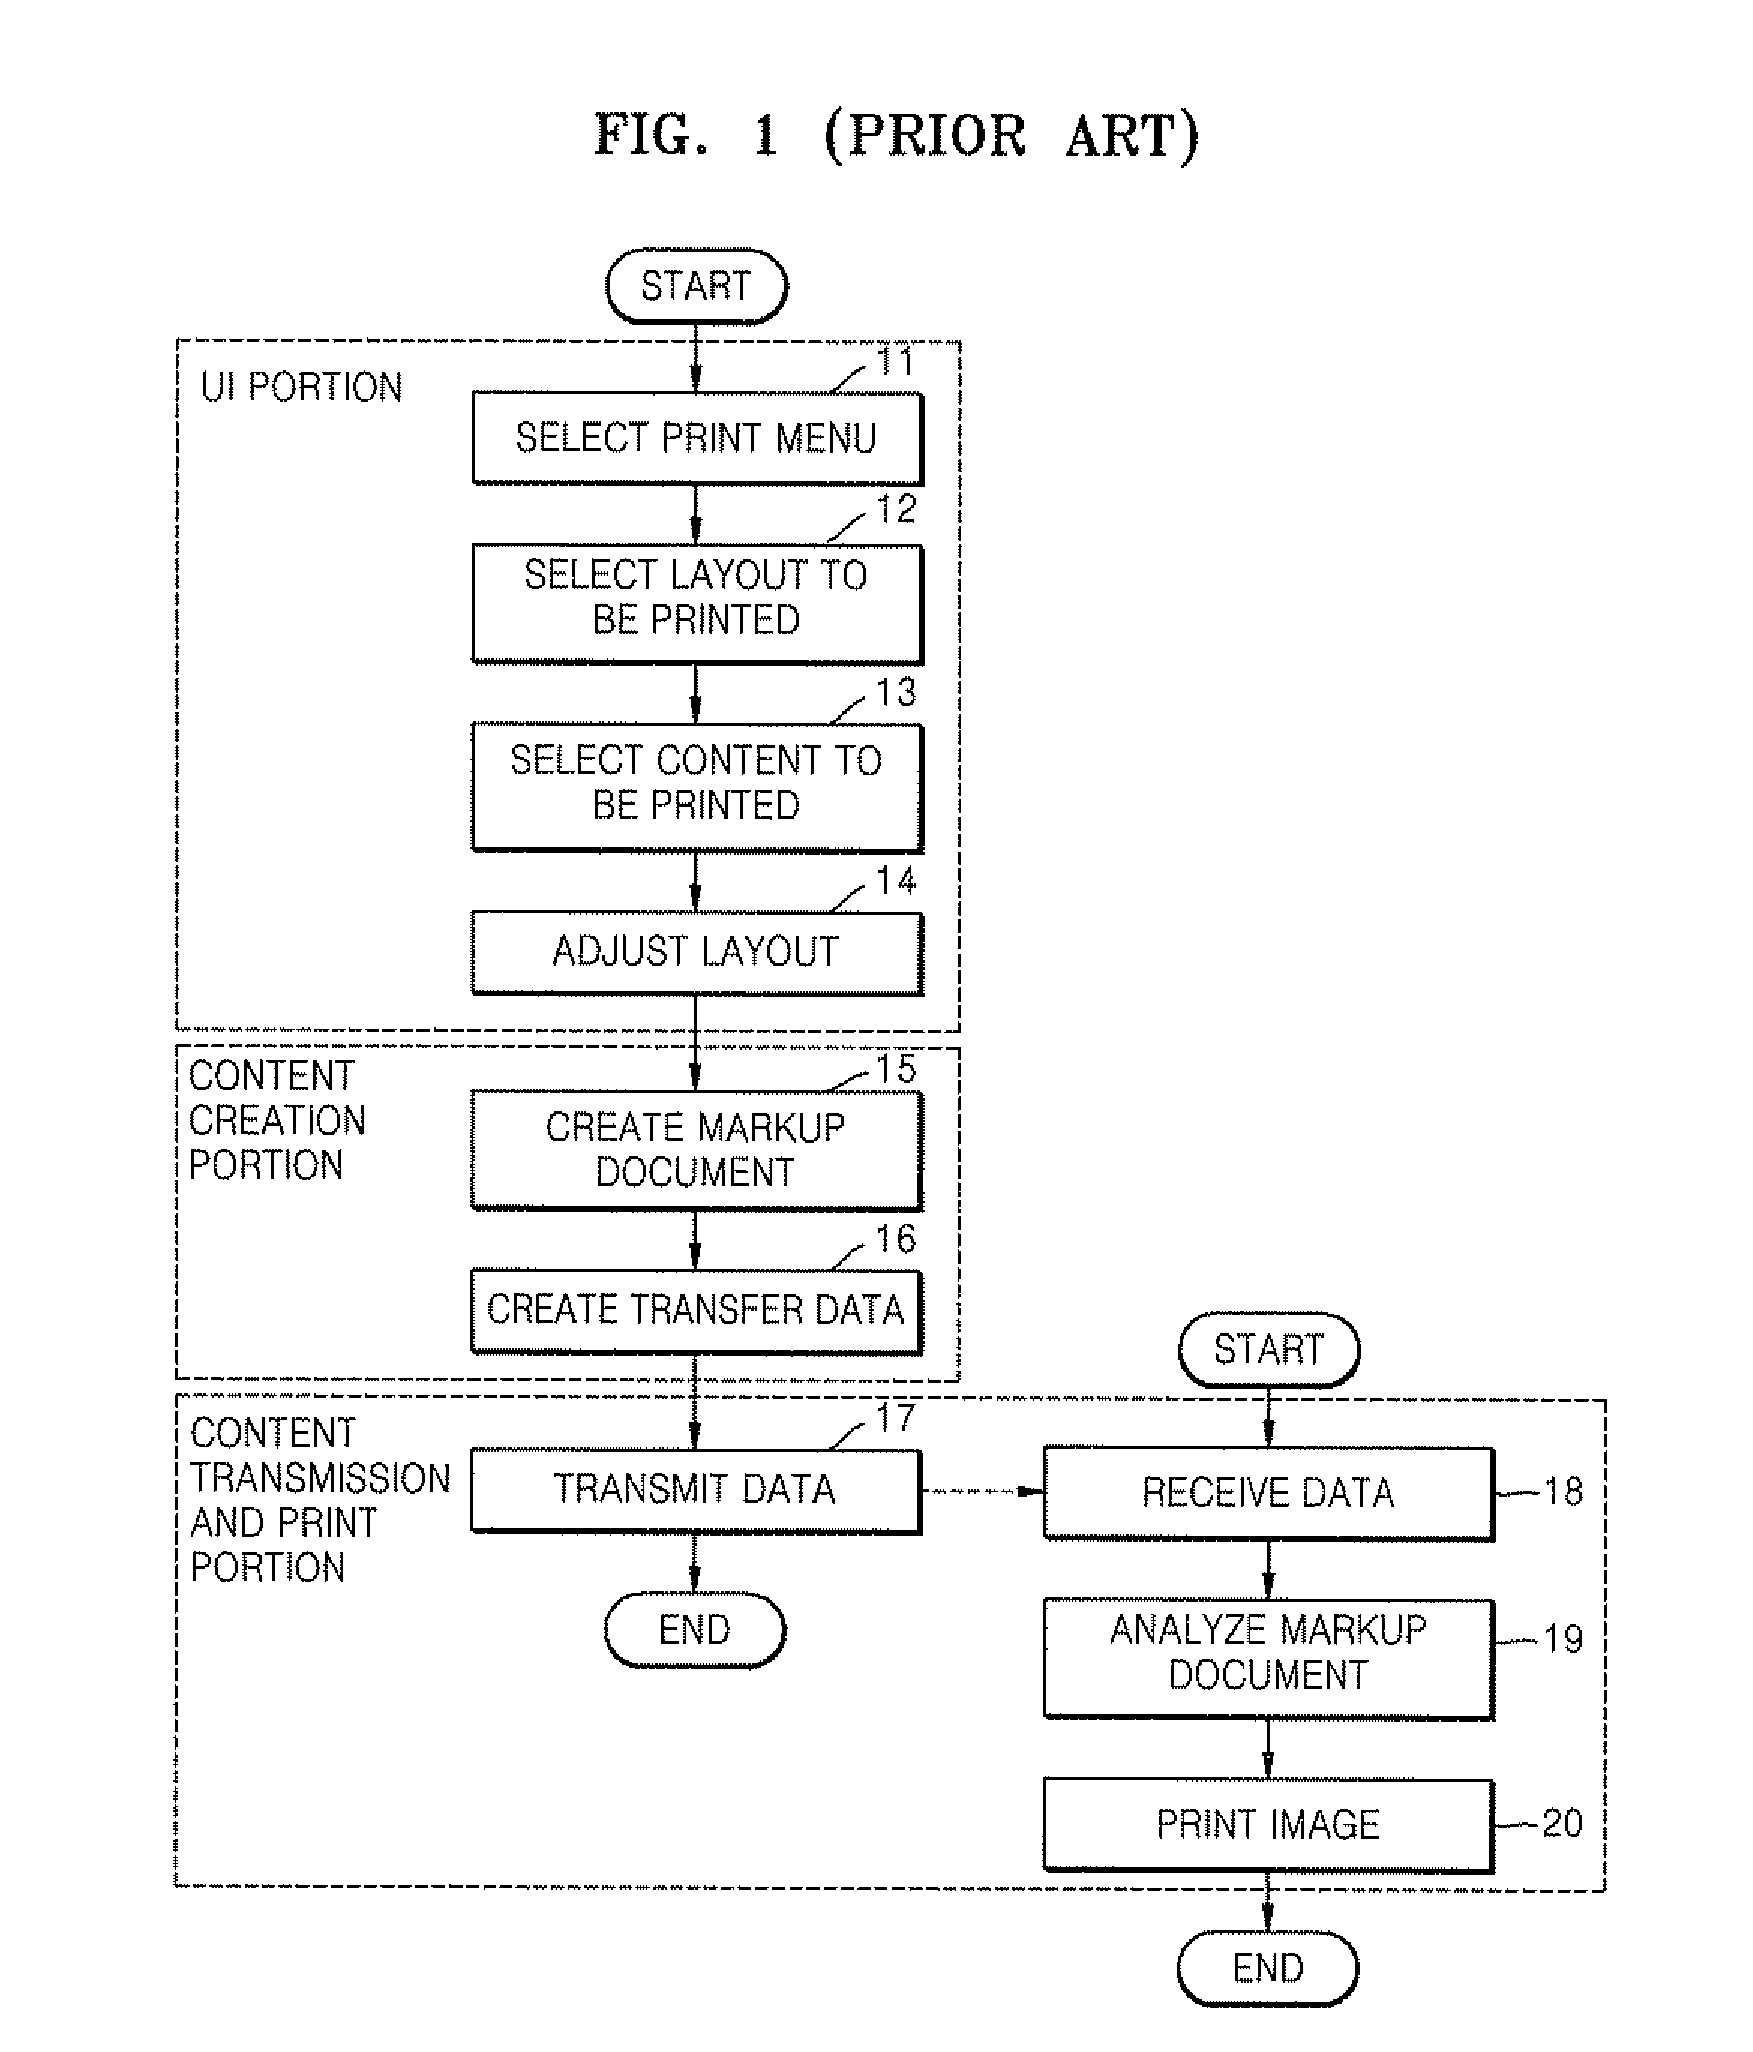 Method and apparatus for transmitting xhtml-print document in mobile device